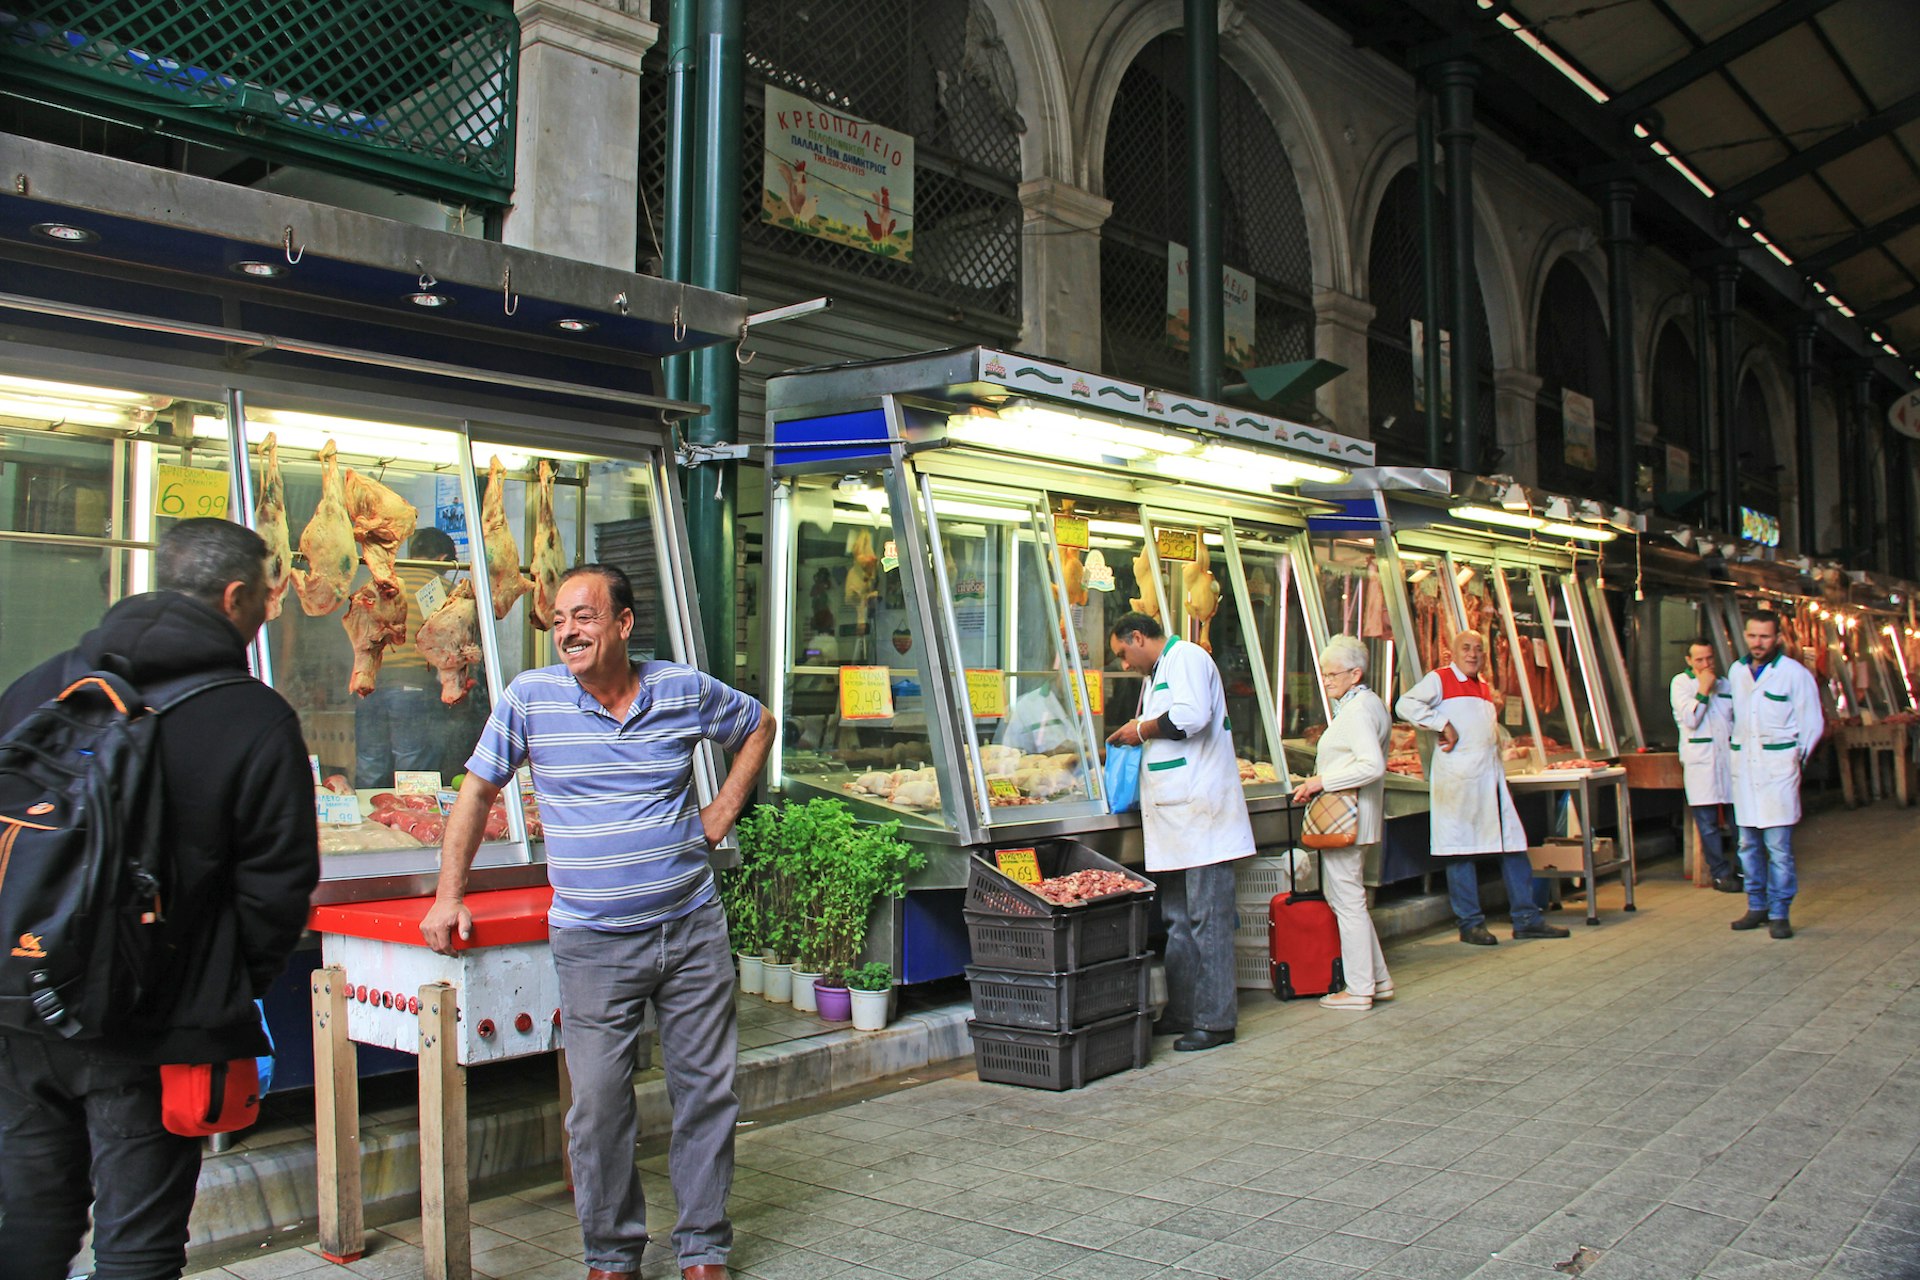 Shoppers and vendors at Varvakios Agora, the central meat and fish market, Athens, Greece